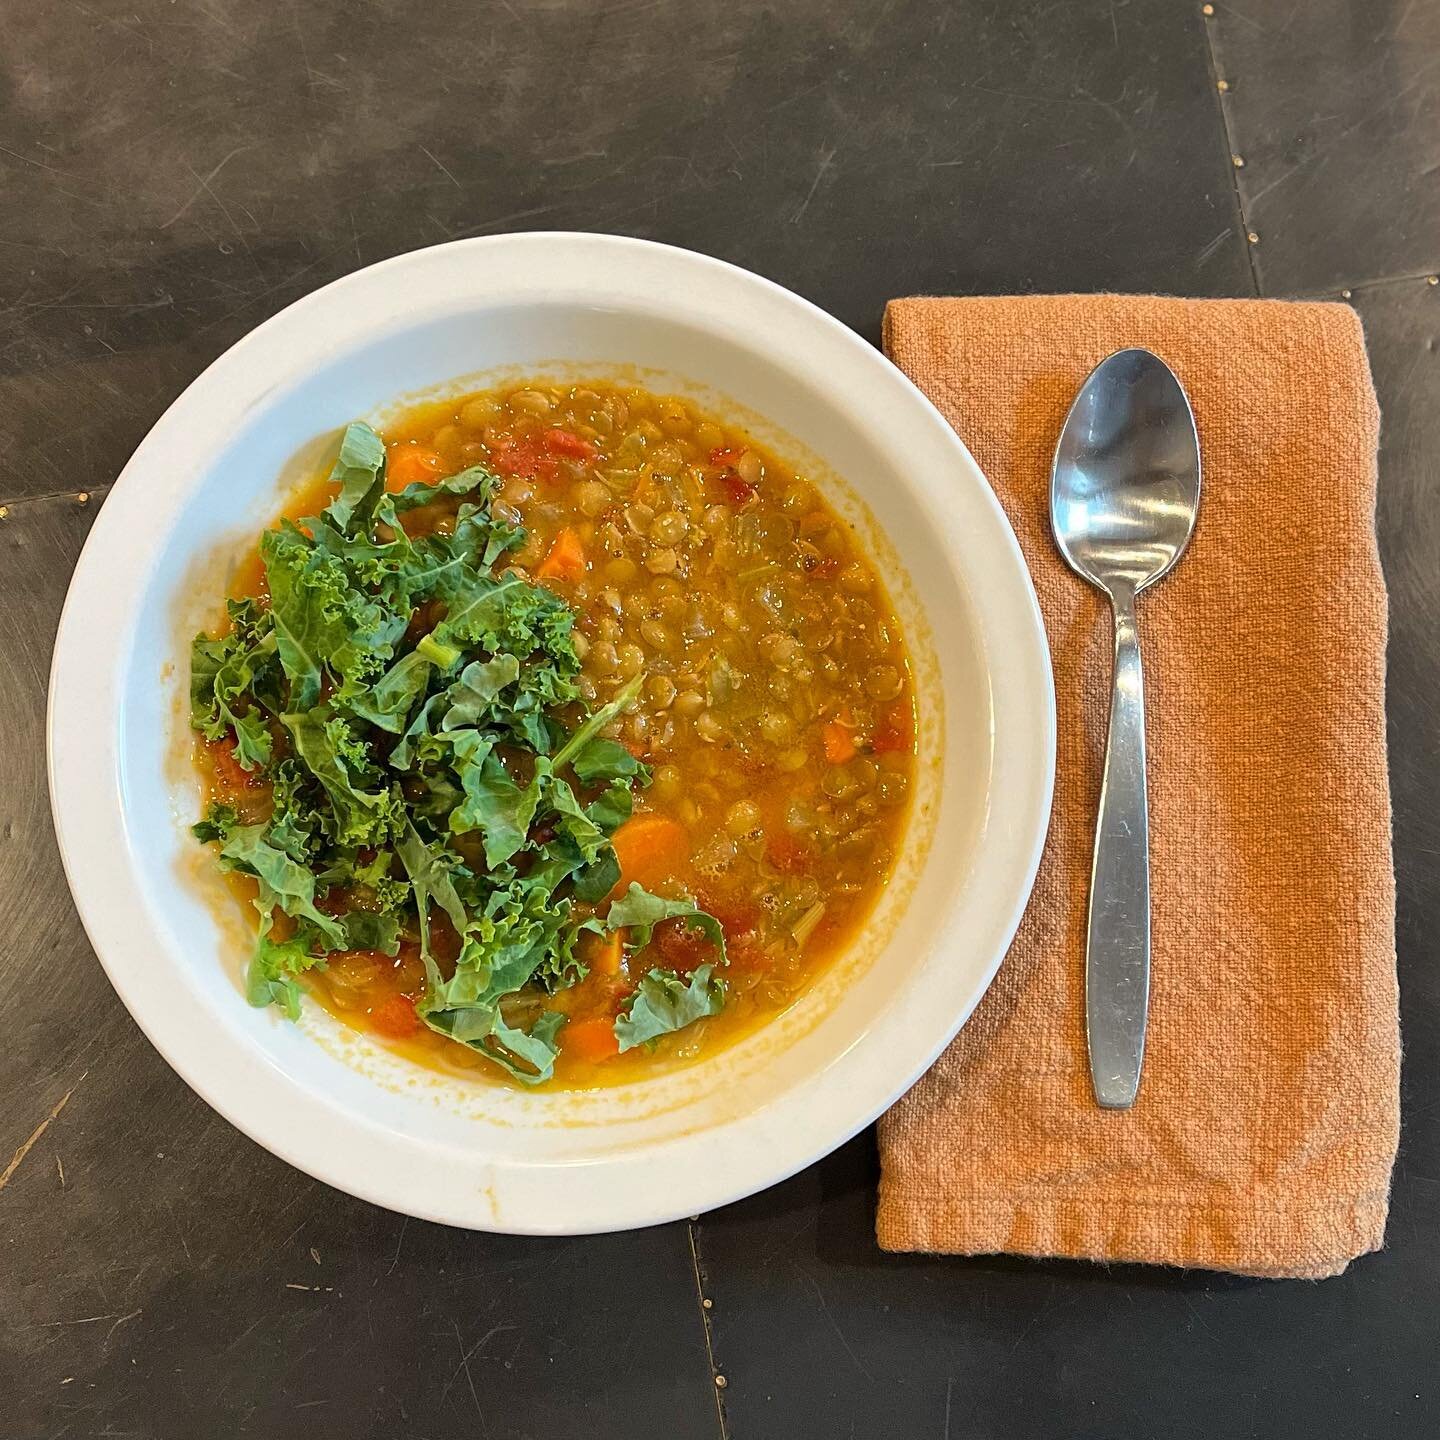 Dinner is served! I love a lentil soup on a cold May Gray day in So Cal. June Gloom is on the horizon so my soup game is strong this time of year 😄 Thank you @cookieandkate for the recipe- it truly is the best. One of my teens even told me it &ldquo